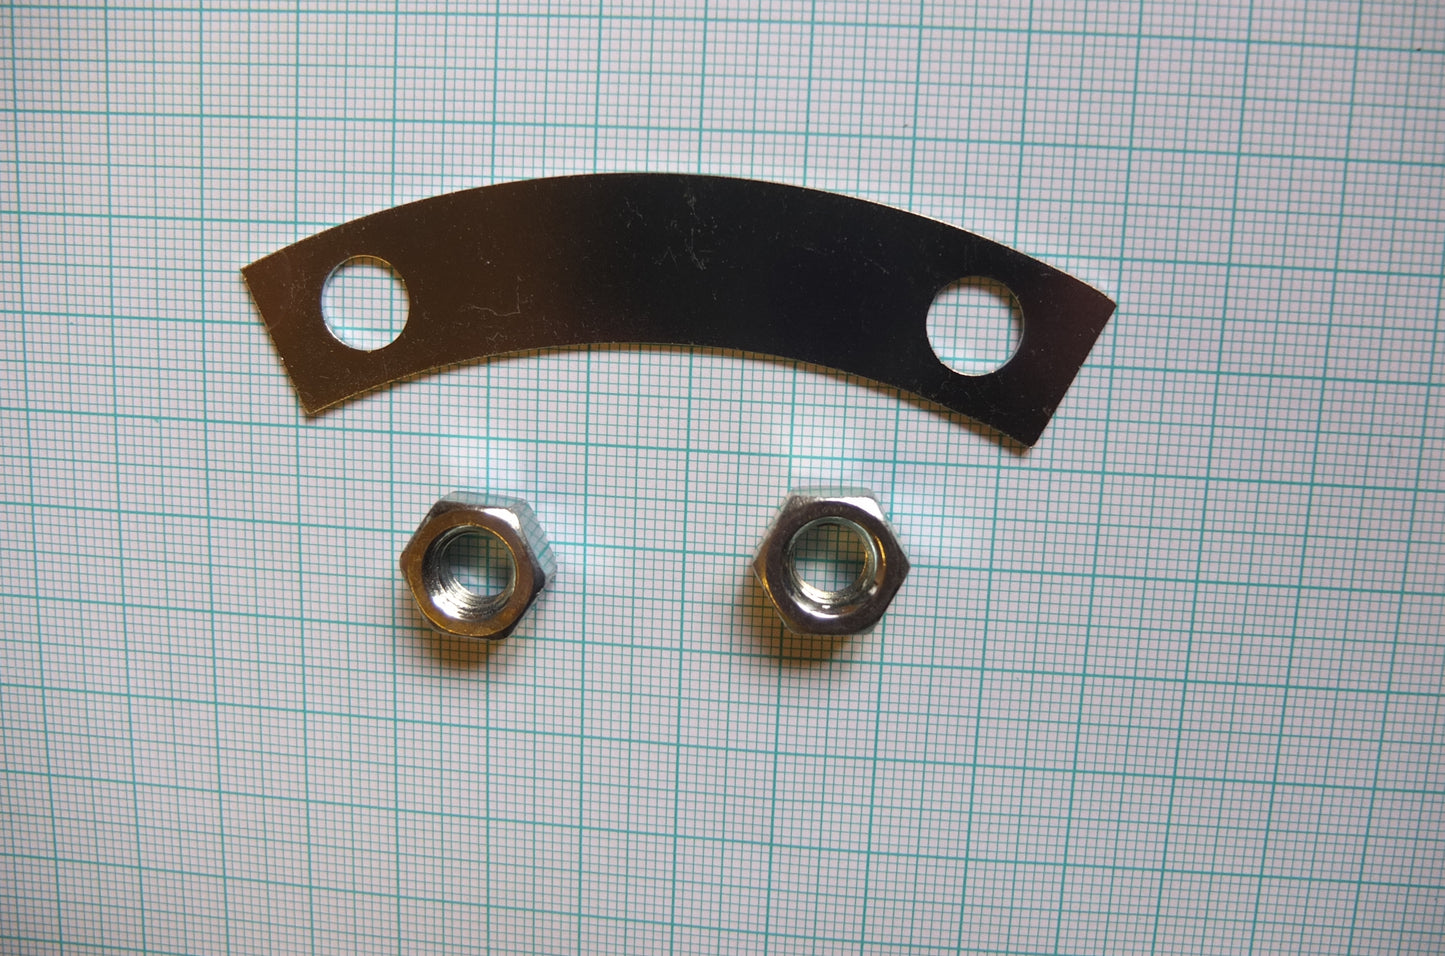 P2/046 Tab washer + 2 nuts